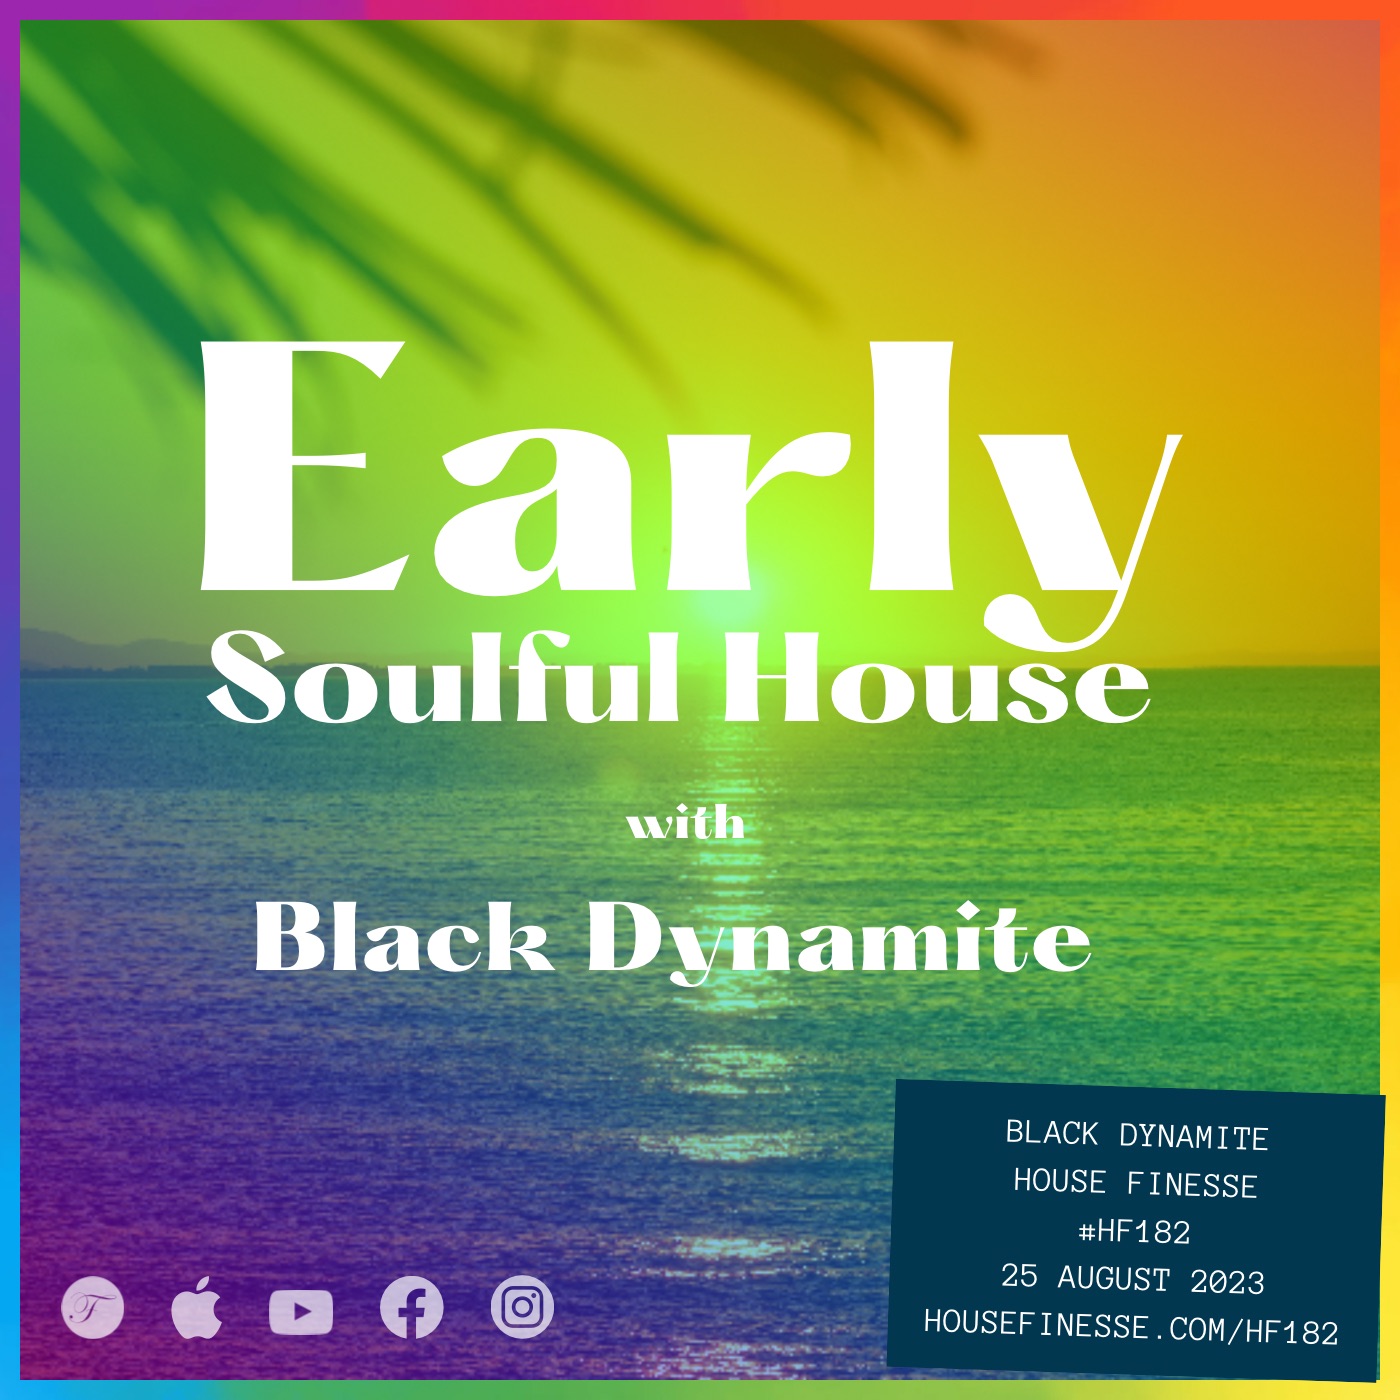 Early Soulful House with Black Dynamite